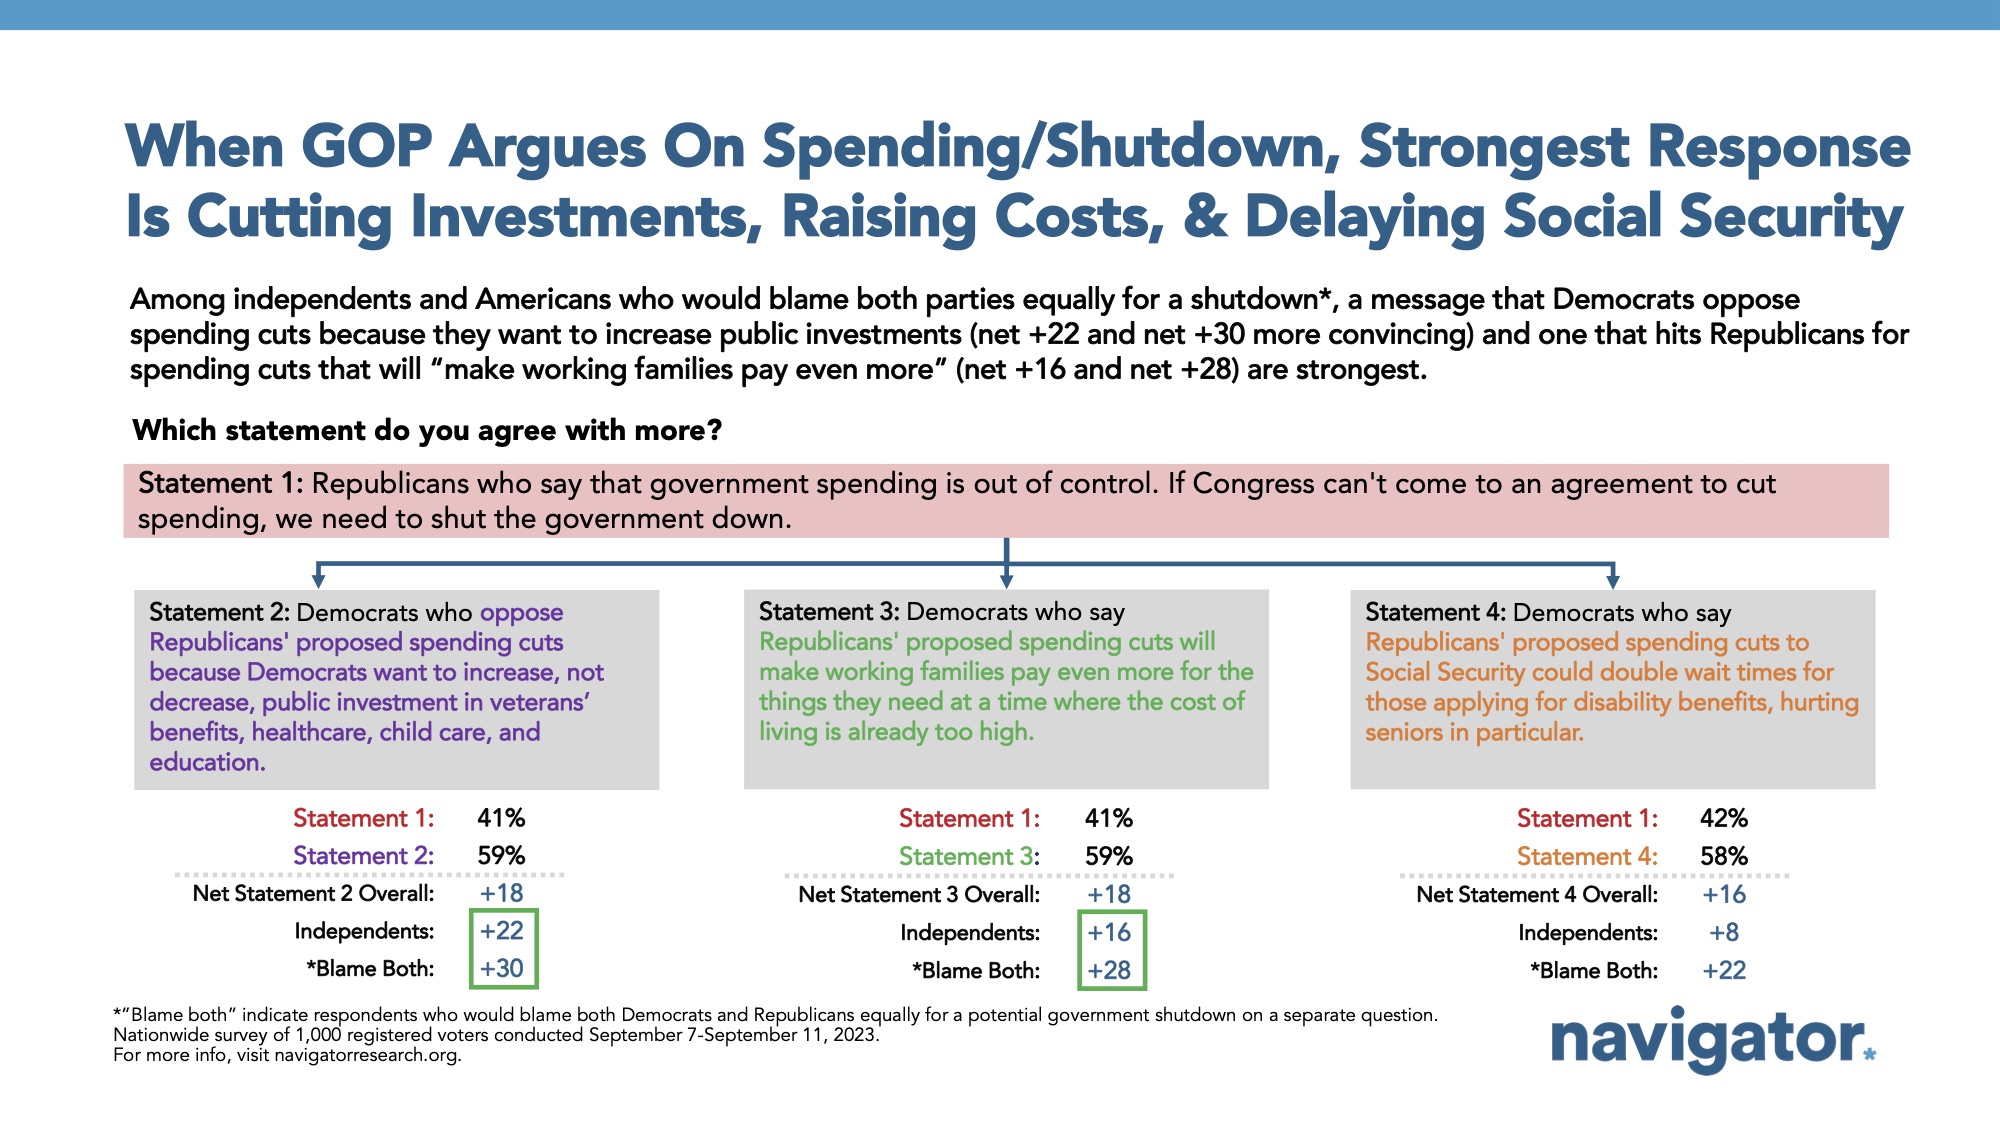 Bar graph of polling data. Title: When GOP Argues On Spending/Shutdown, Strongest Response Is Cutting Investments, Raising Costs, & Delaying Social Security